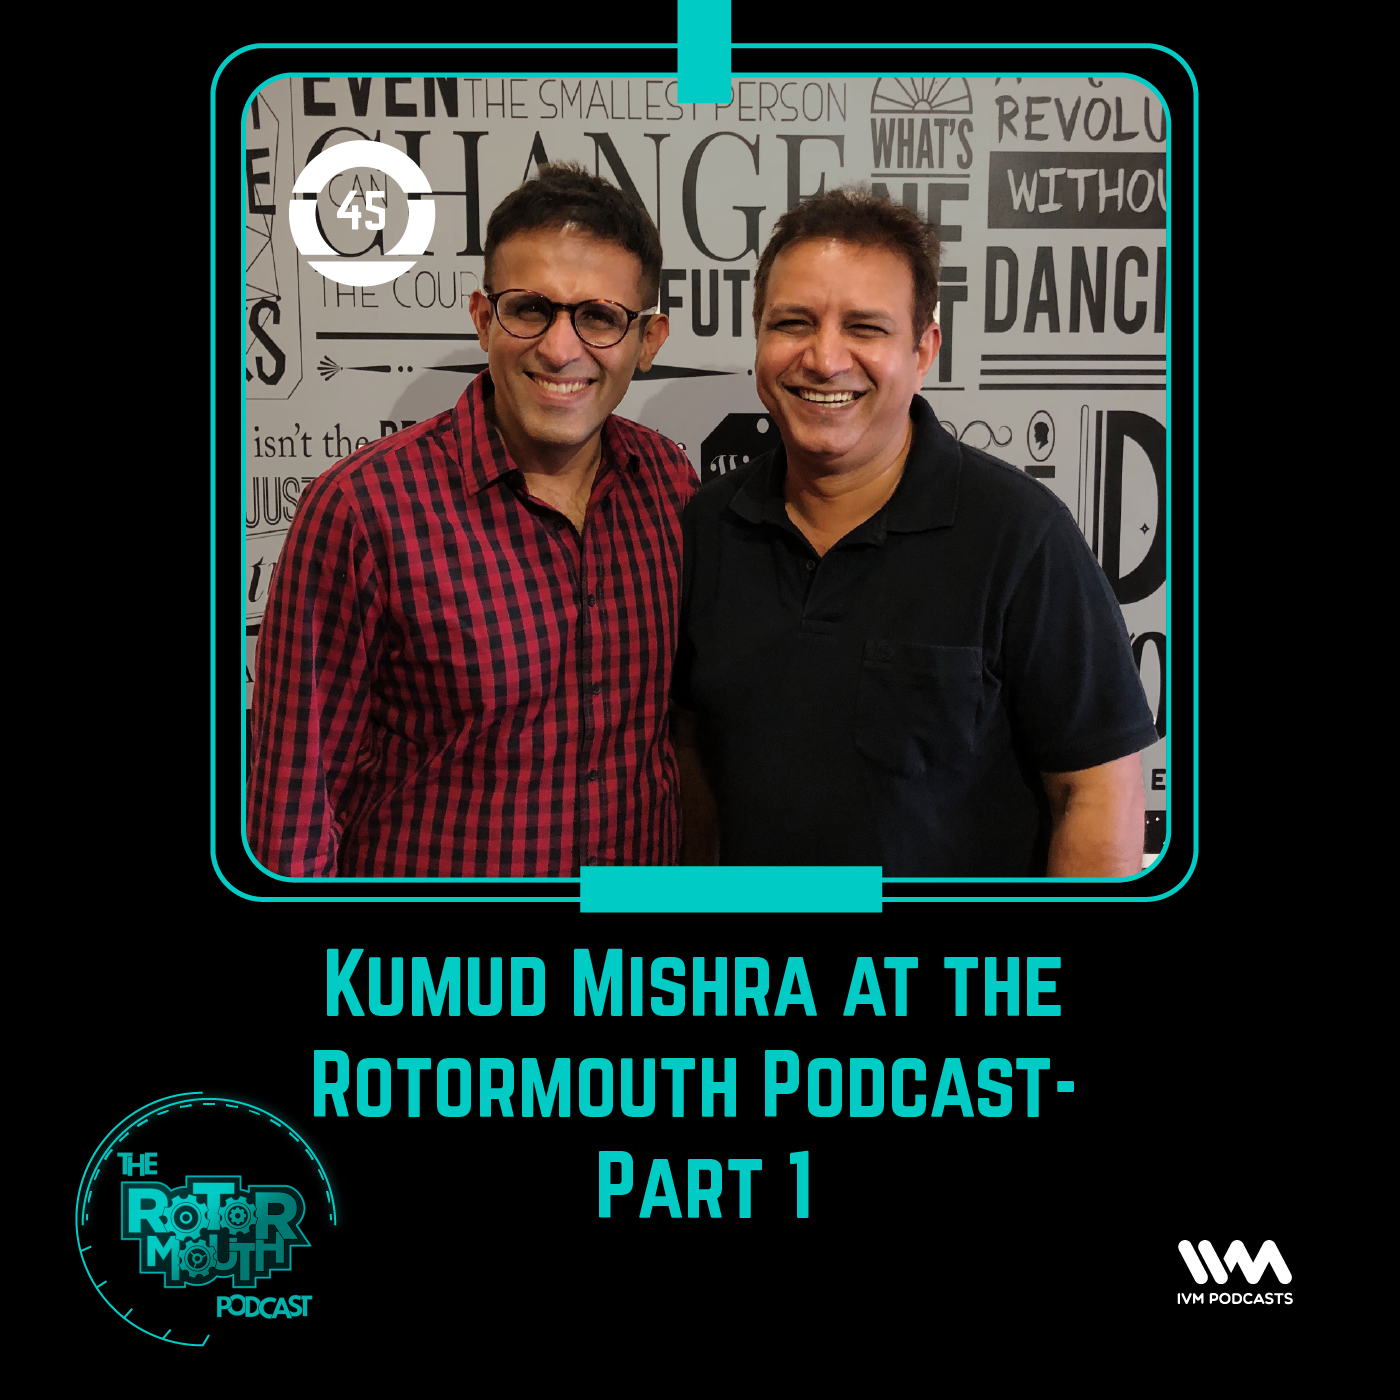 Ep. 45: Kumud Mishra at the Rotormouth Podcast- Part 1